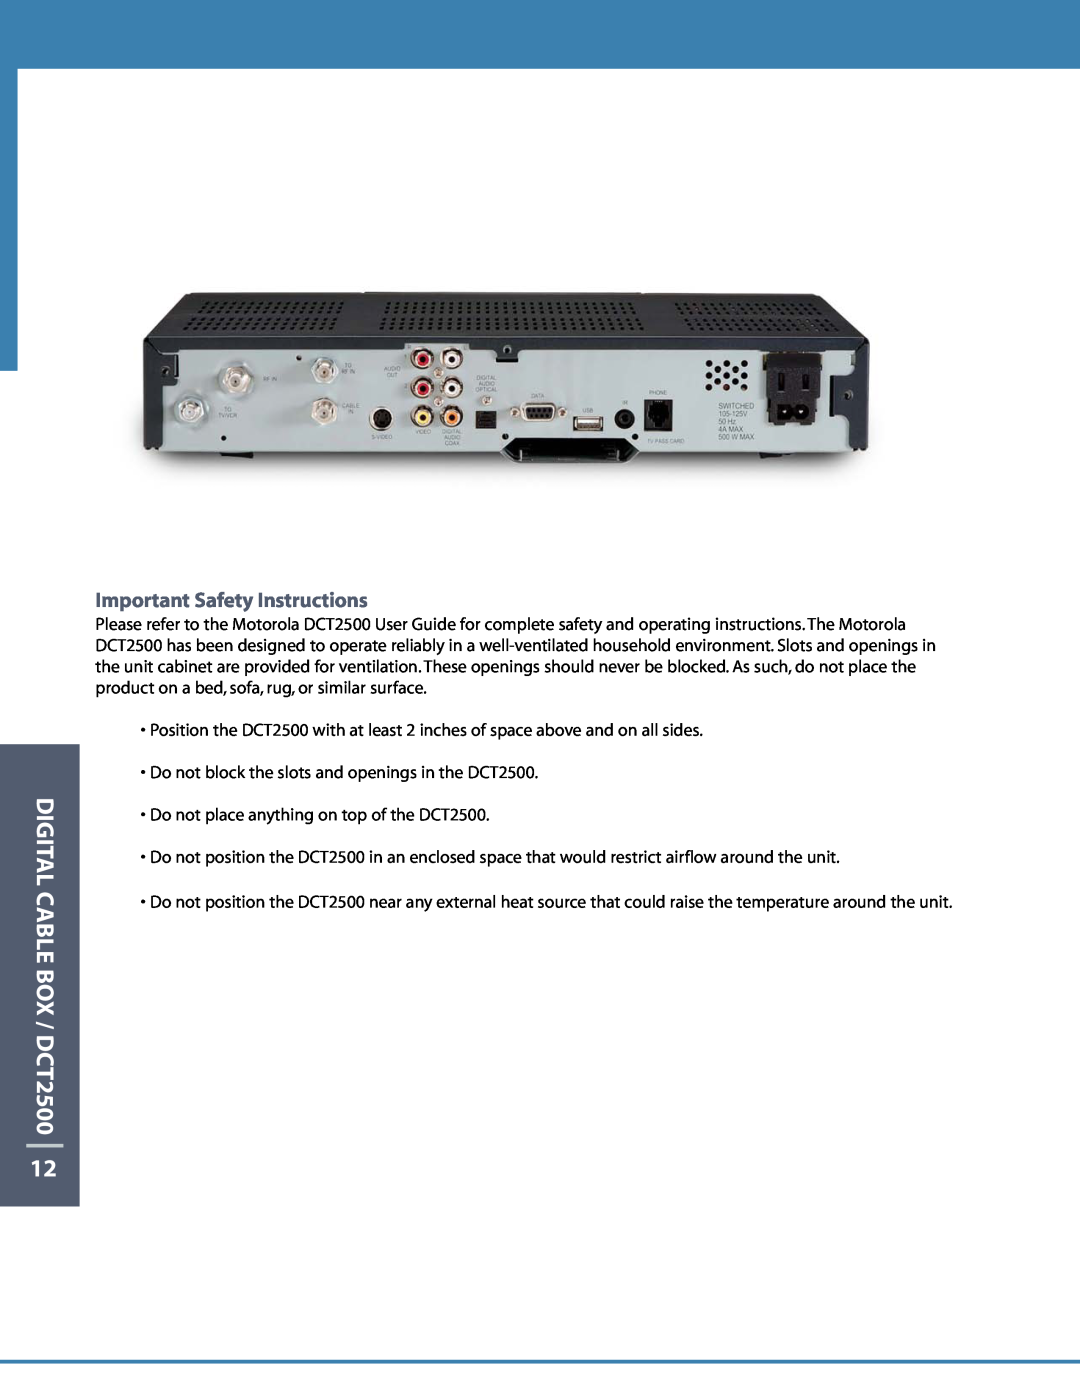 Motorola DCT6208 DIGITAL CABLE BOX / DCT2500, Important Safety Instructions, Do not place anything on top of the DCT2500 